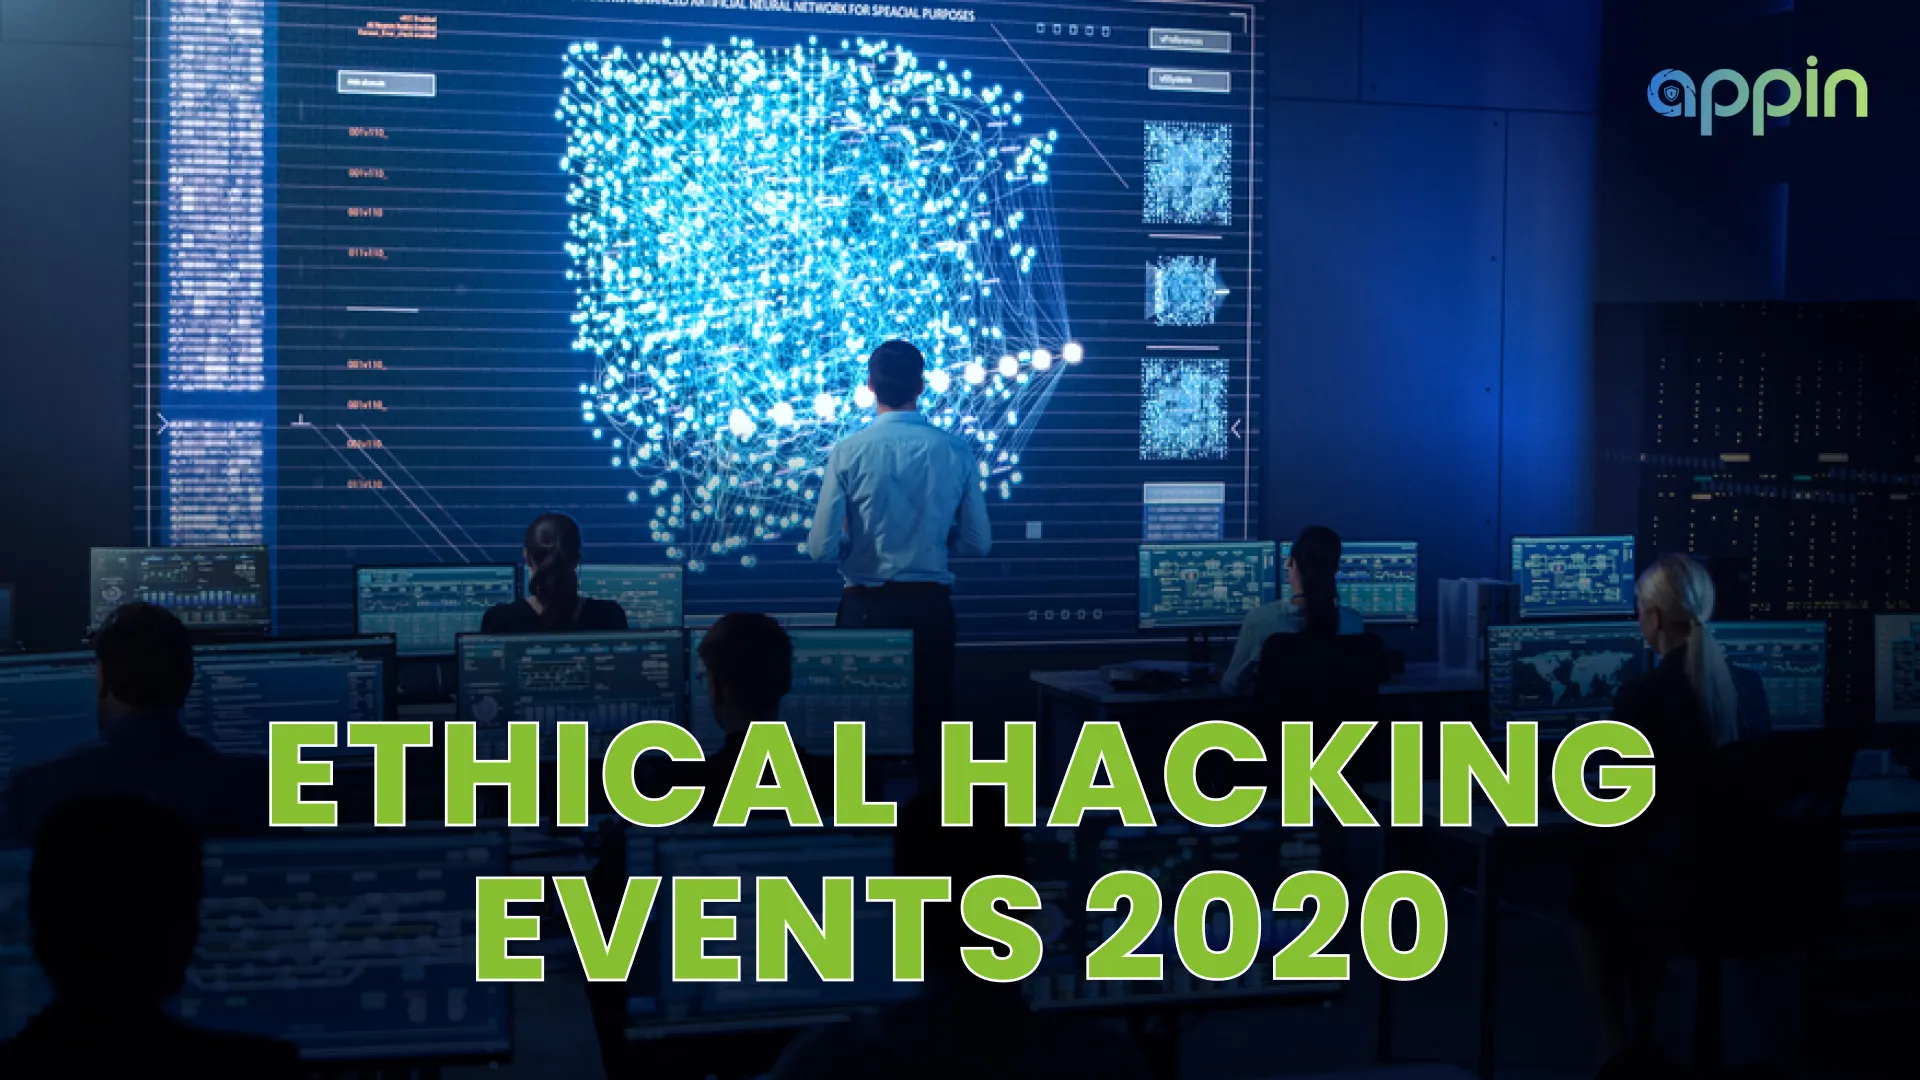 Ethical Hacking Events 2020